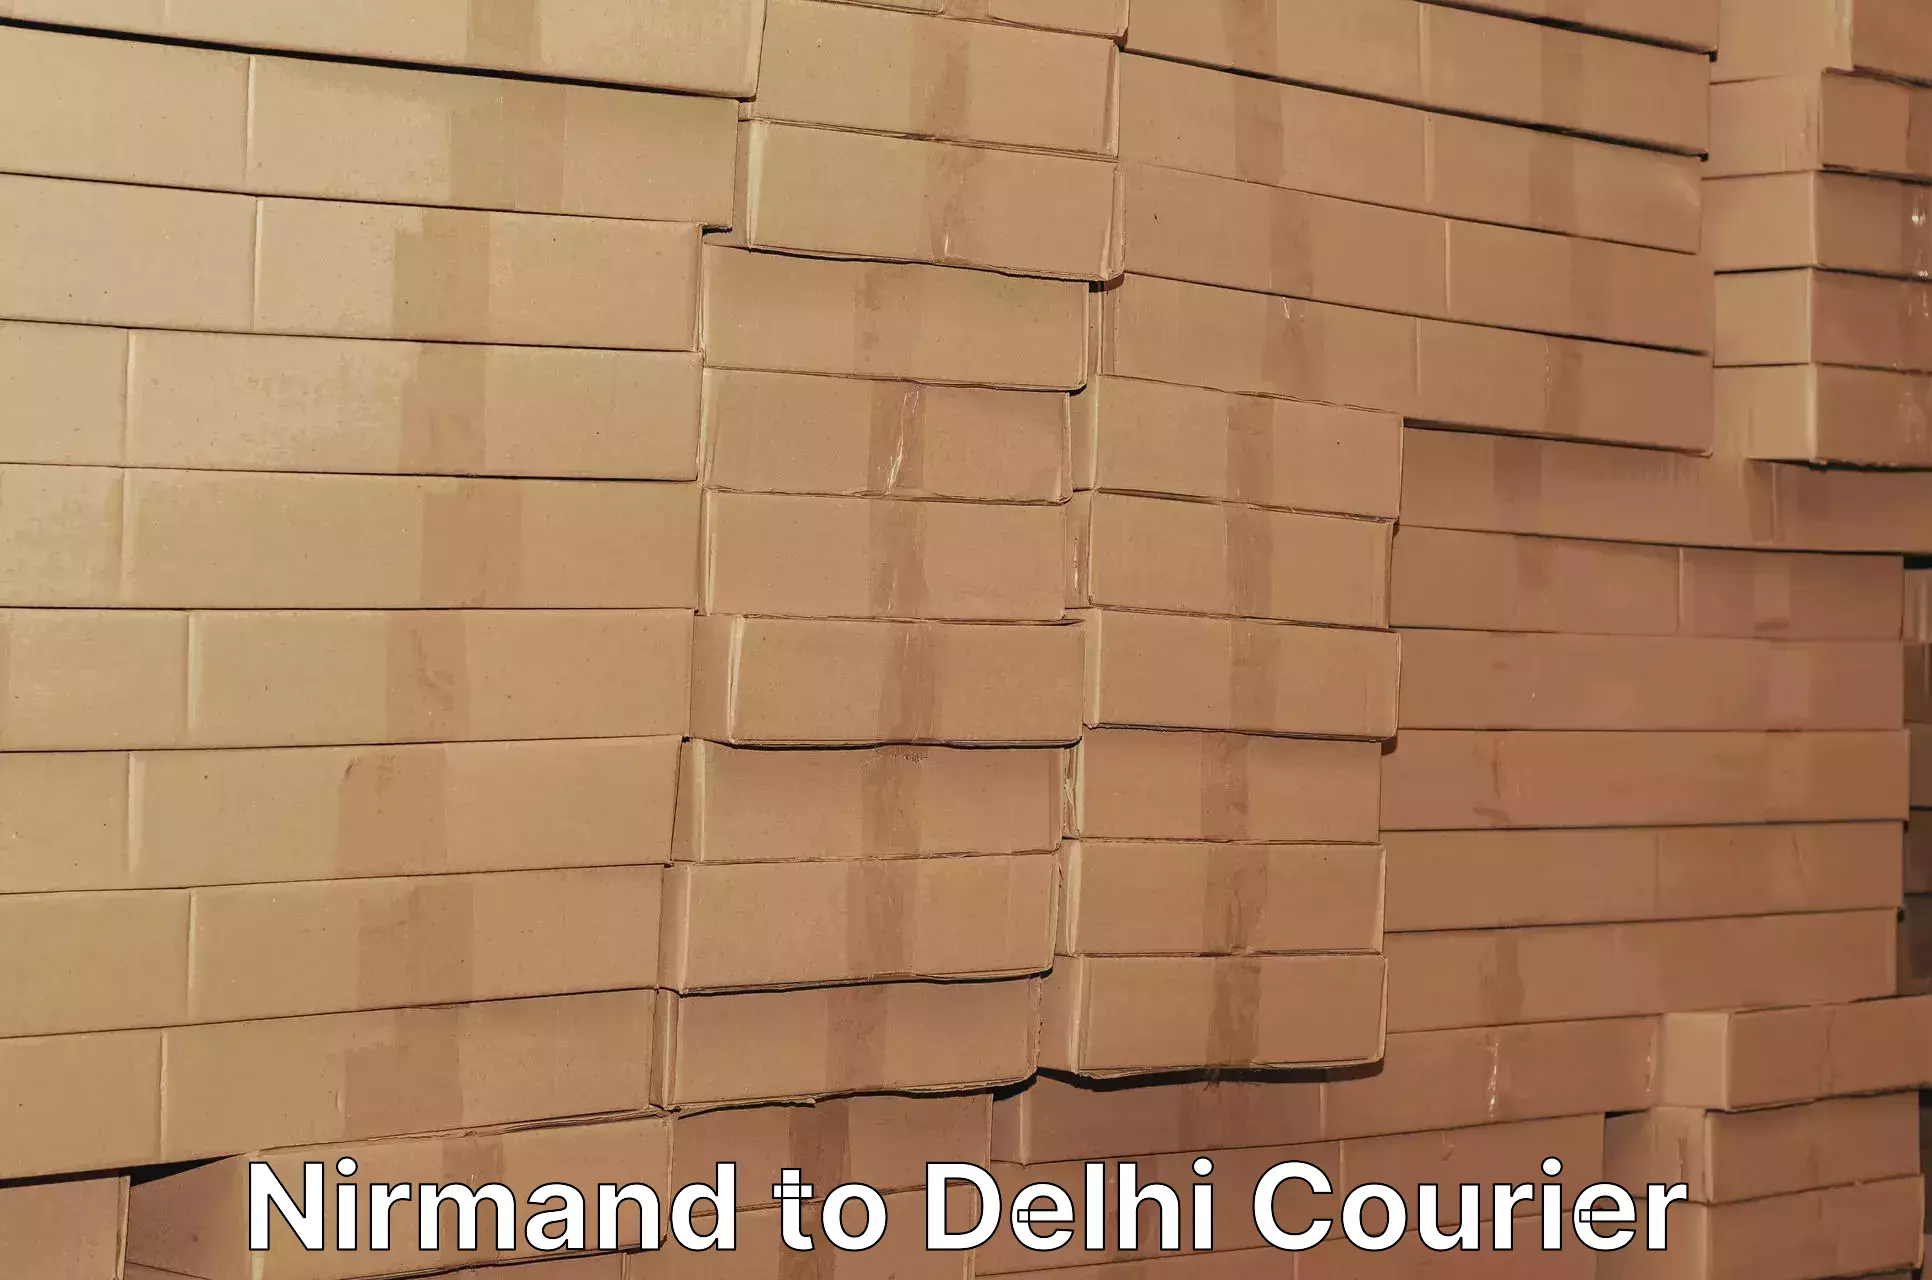 24-hour courier service Nirmand to NCR